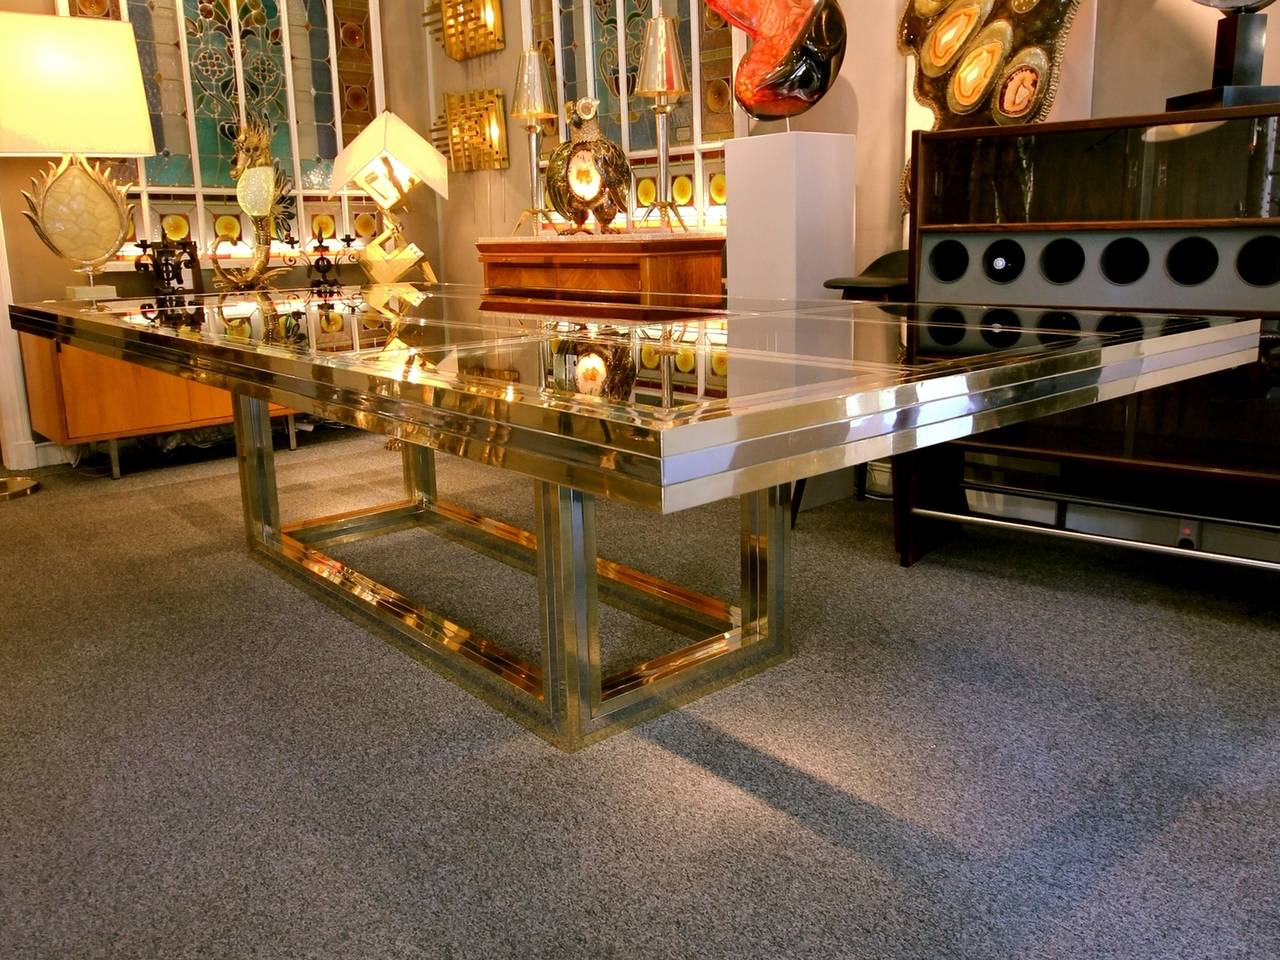 Wonderful large dining or conference table in polished brass and chromed metal, with beveled and tinted glasses. Wonderful quality and design.